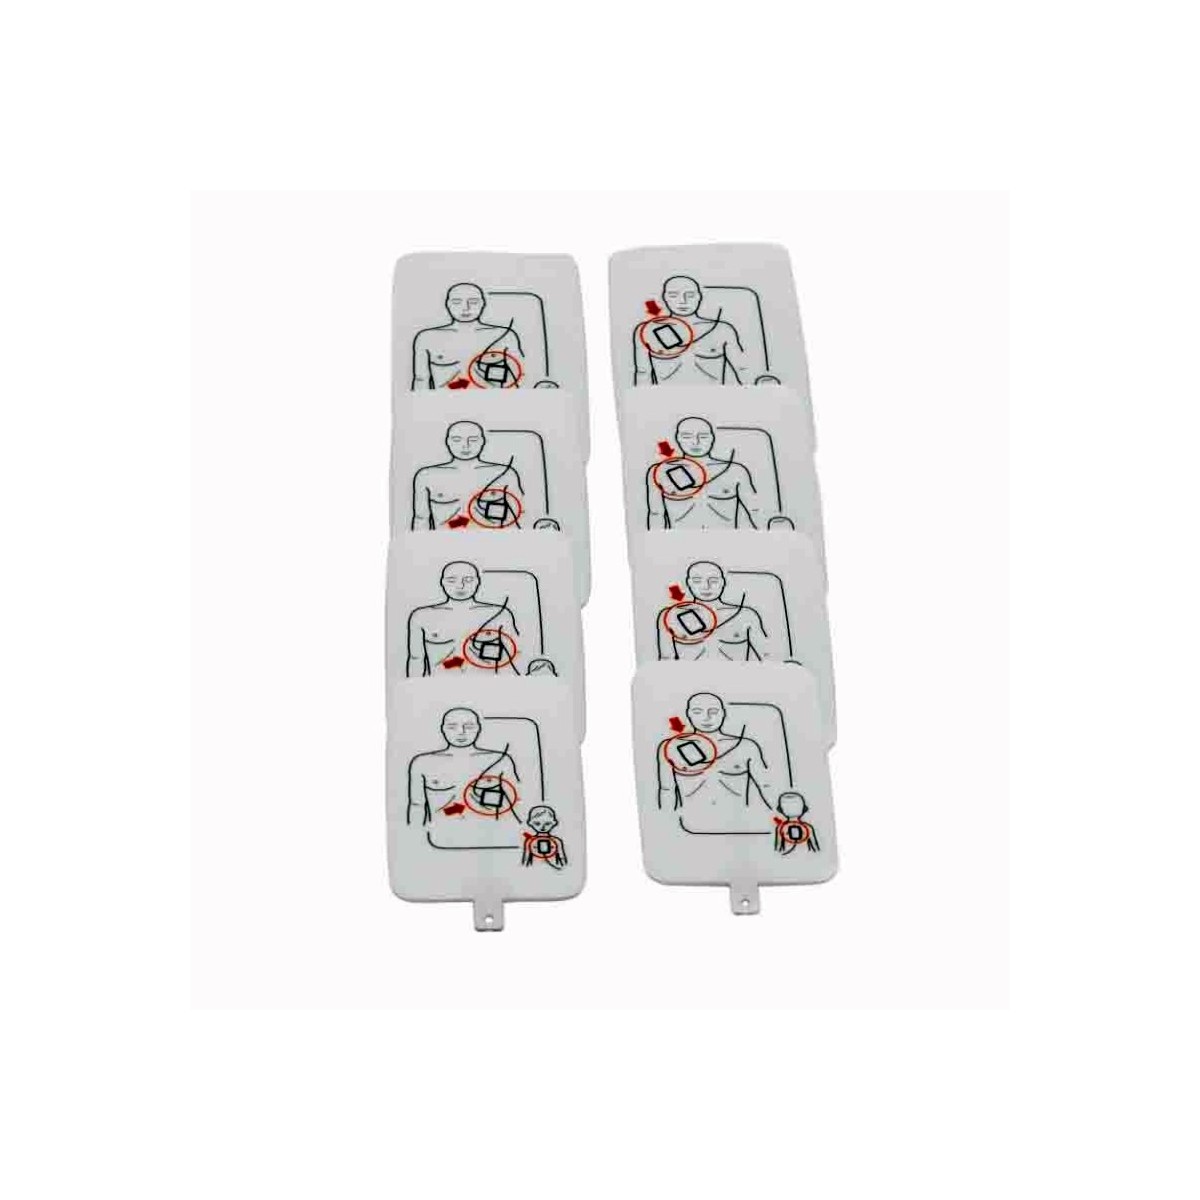 Adult/Child Training Pads for the PRESTAN AED UltraTrainer 4-Pack